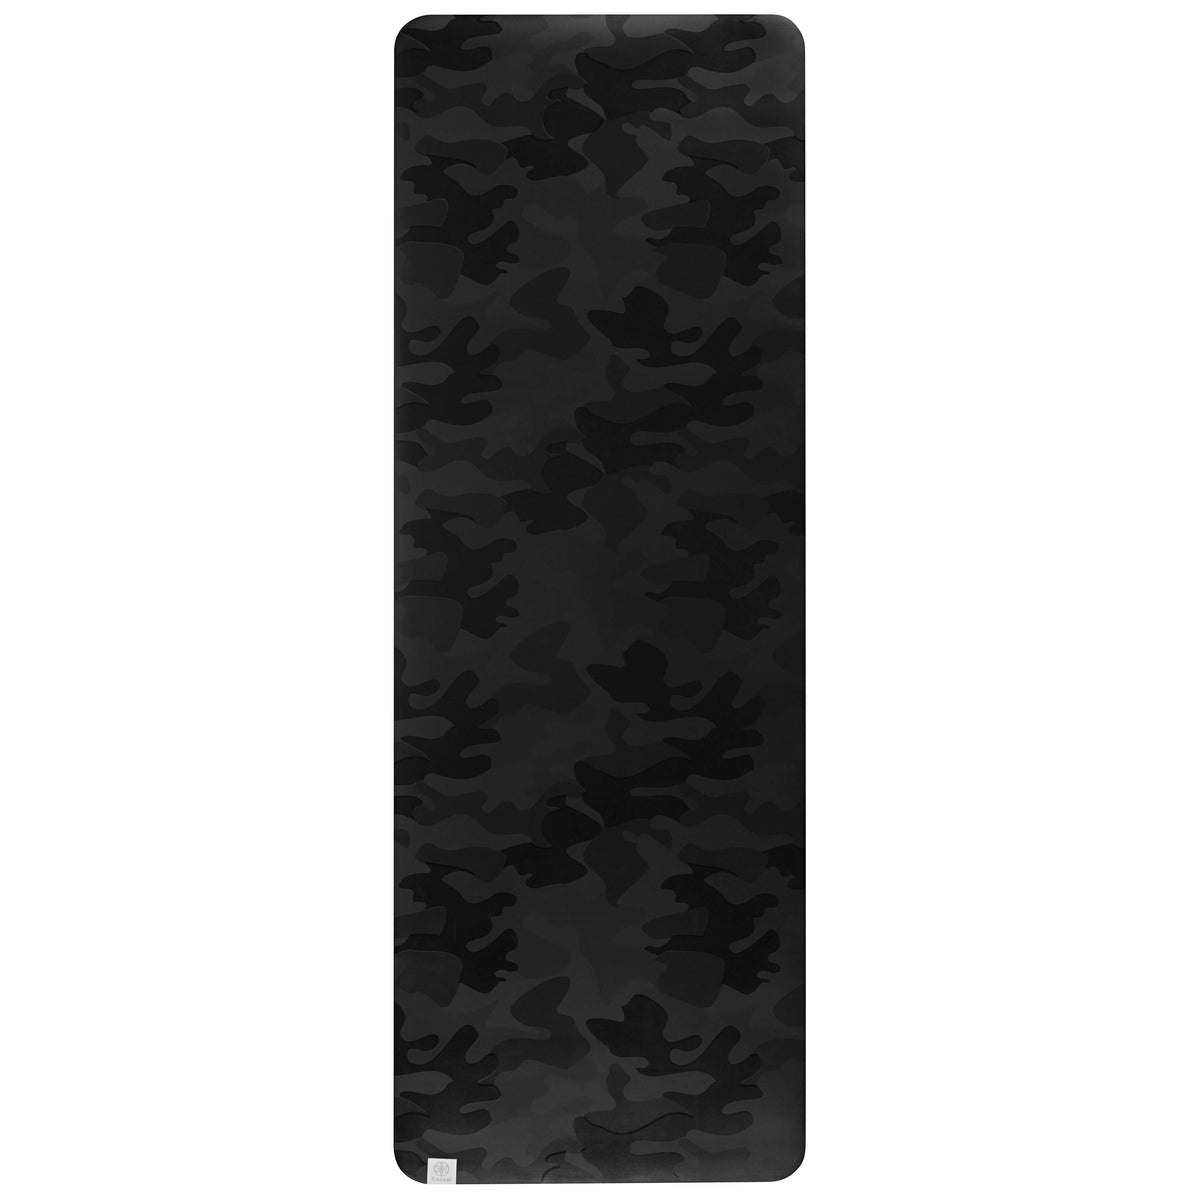  Gray Camo For Boys, Black Camouflage For Men White Camoflage :  Cell Phones & Accessories